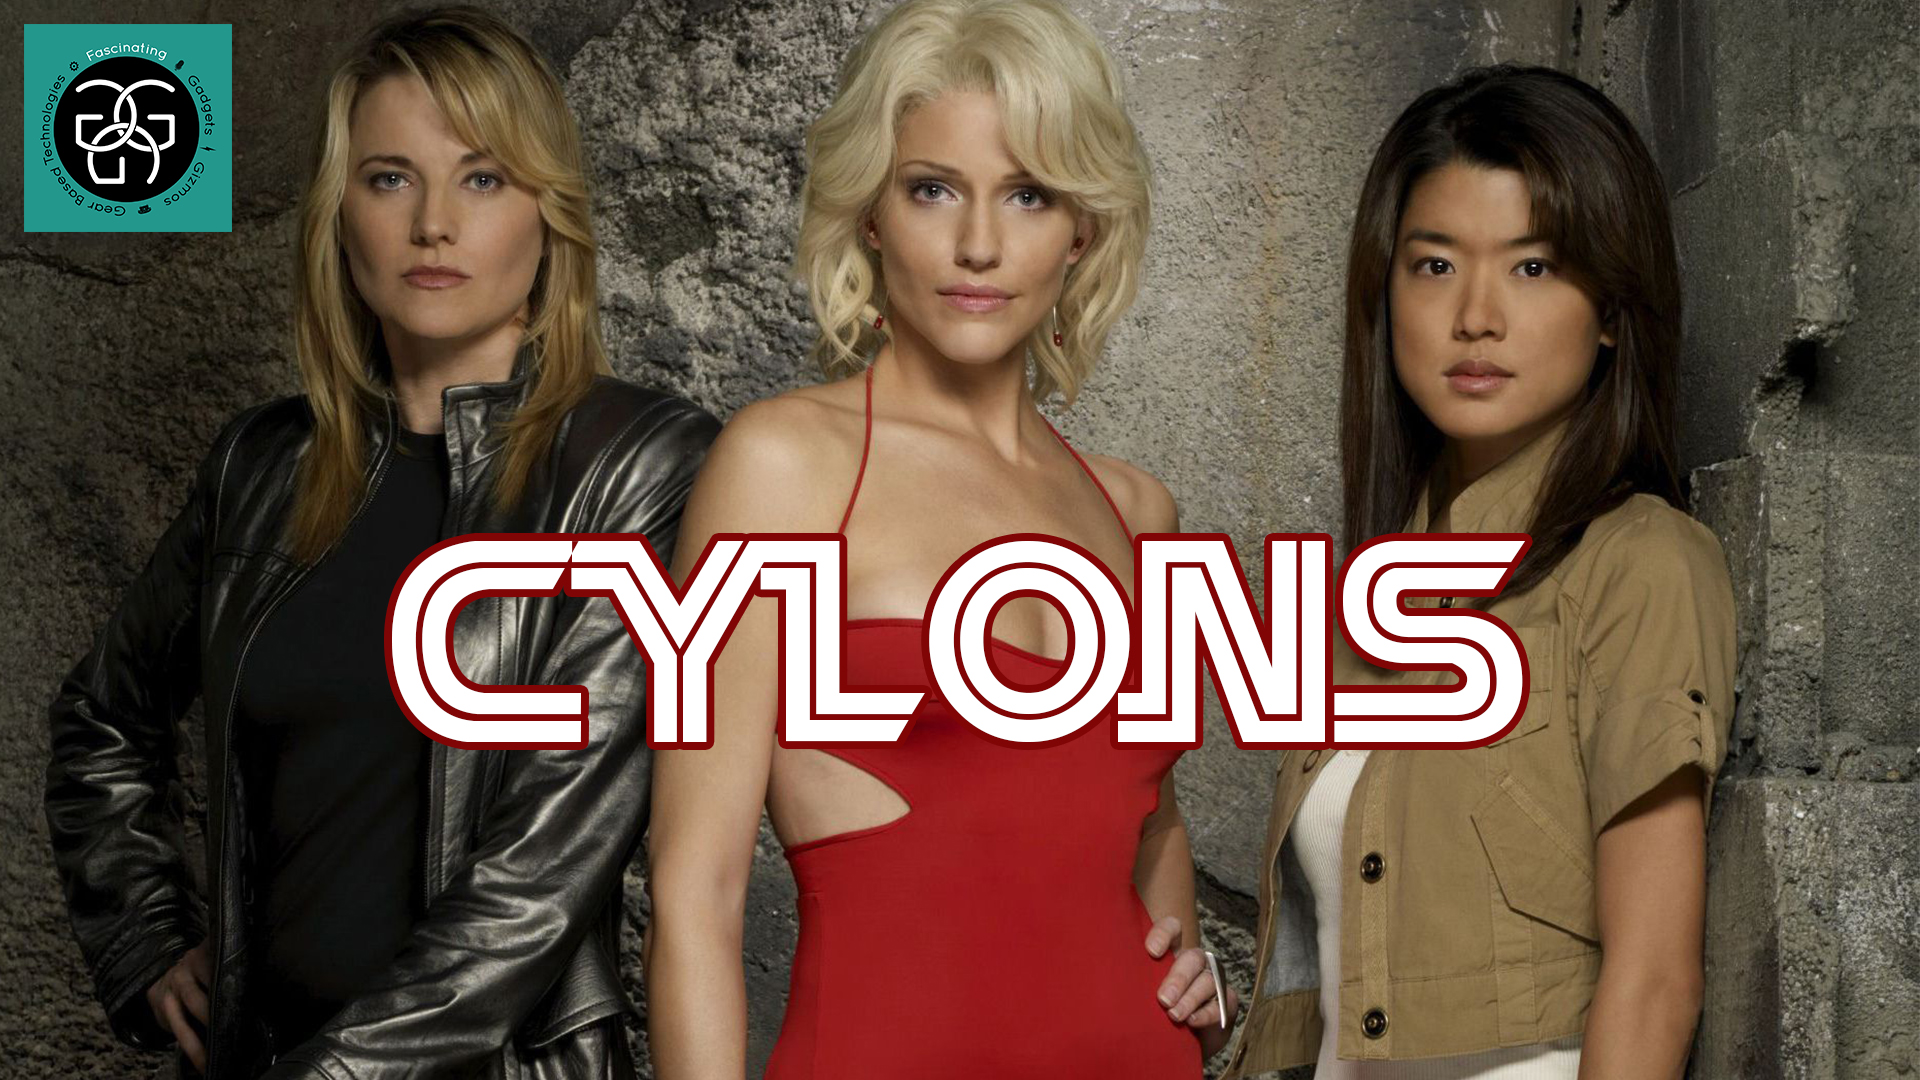 You are currently viewing Ep. 25 Battlestar Galactica’s Cylons